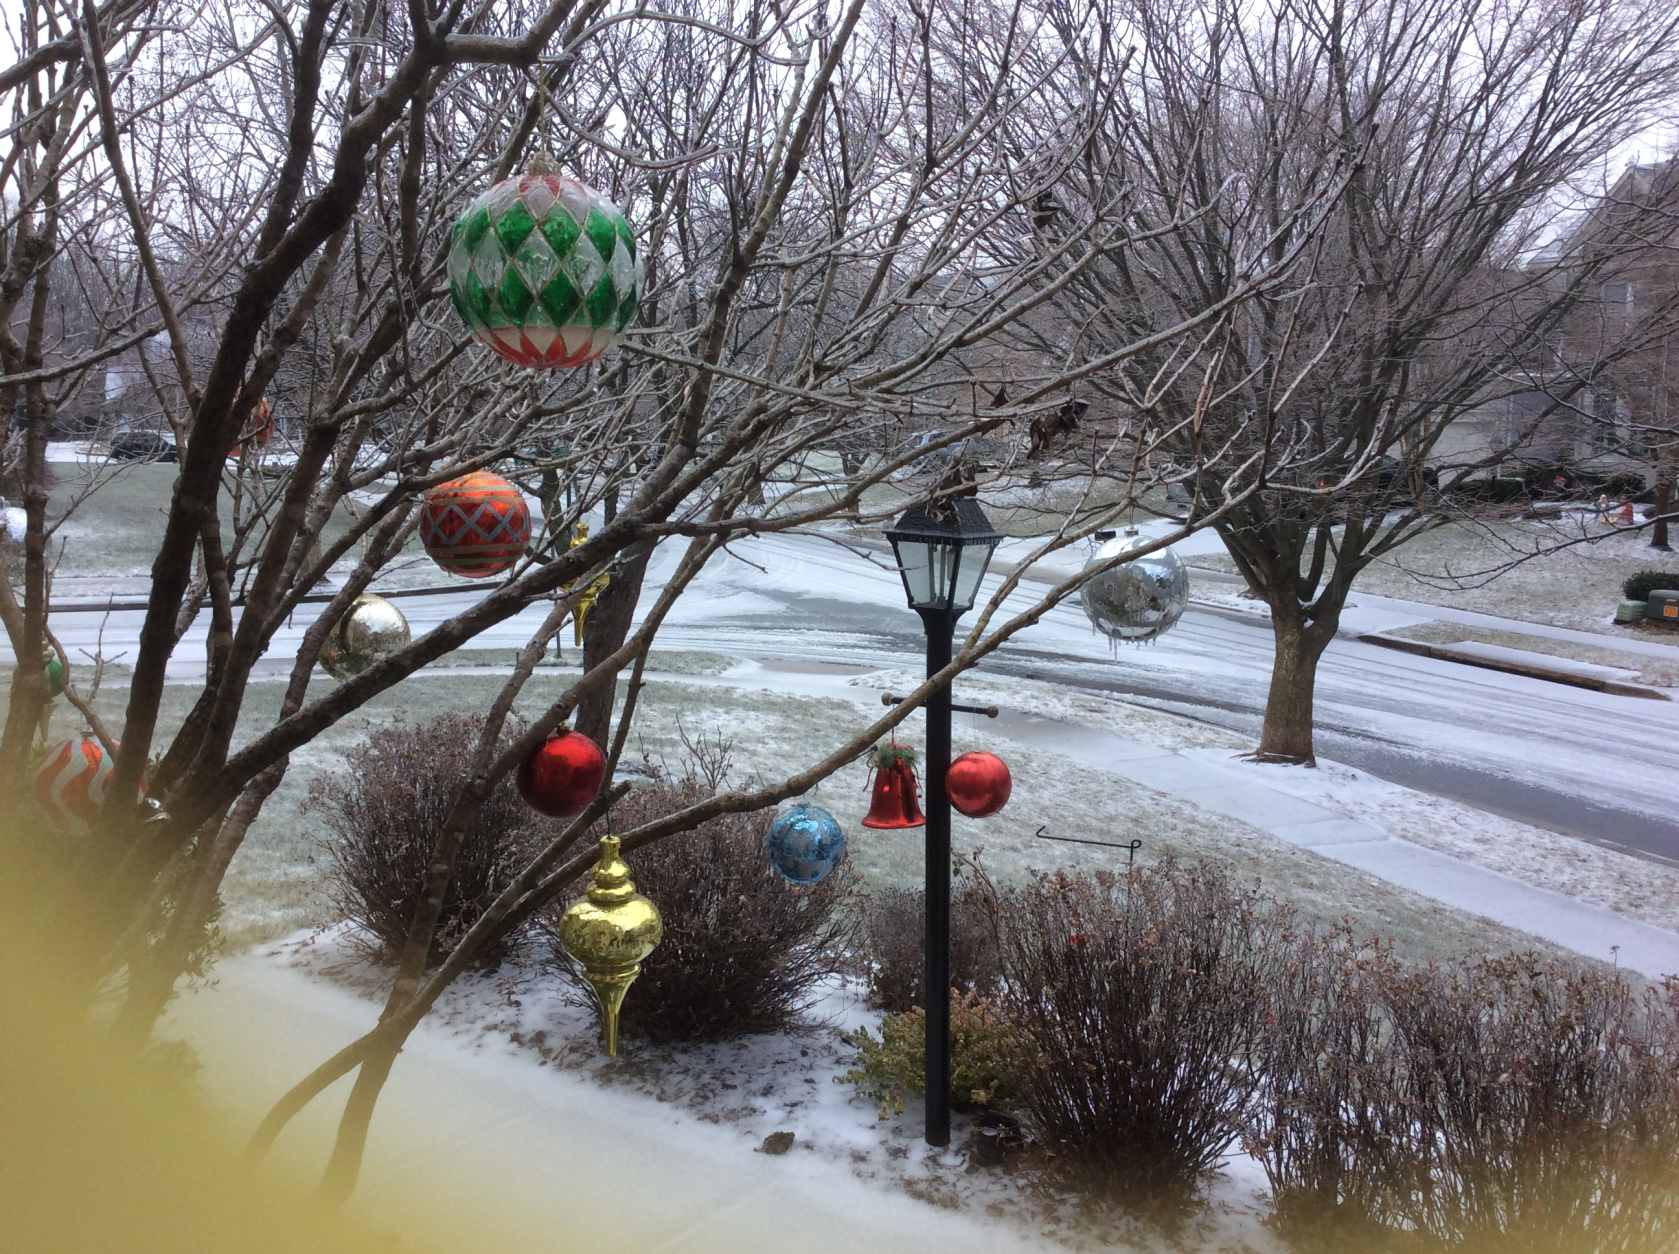 Ornaments hang from an icy tree in a frost-covered front yard Saturday morning in Olney, Md. (Courtesy Susan Temor)